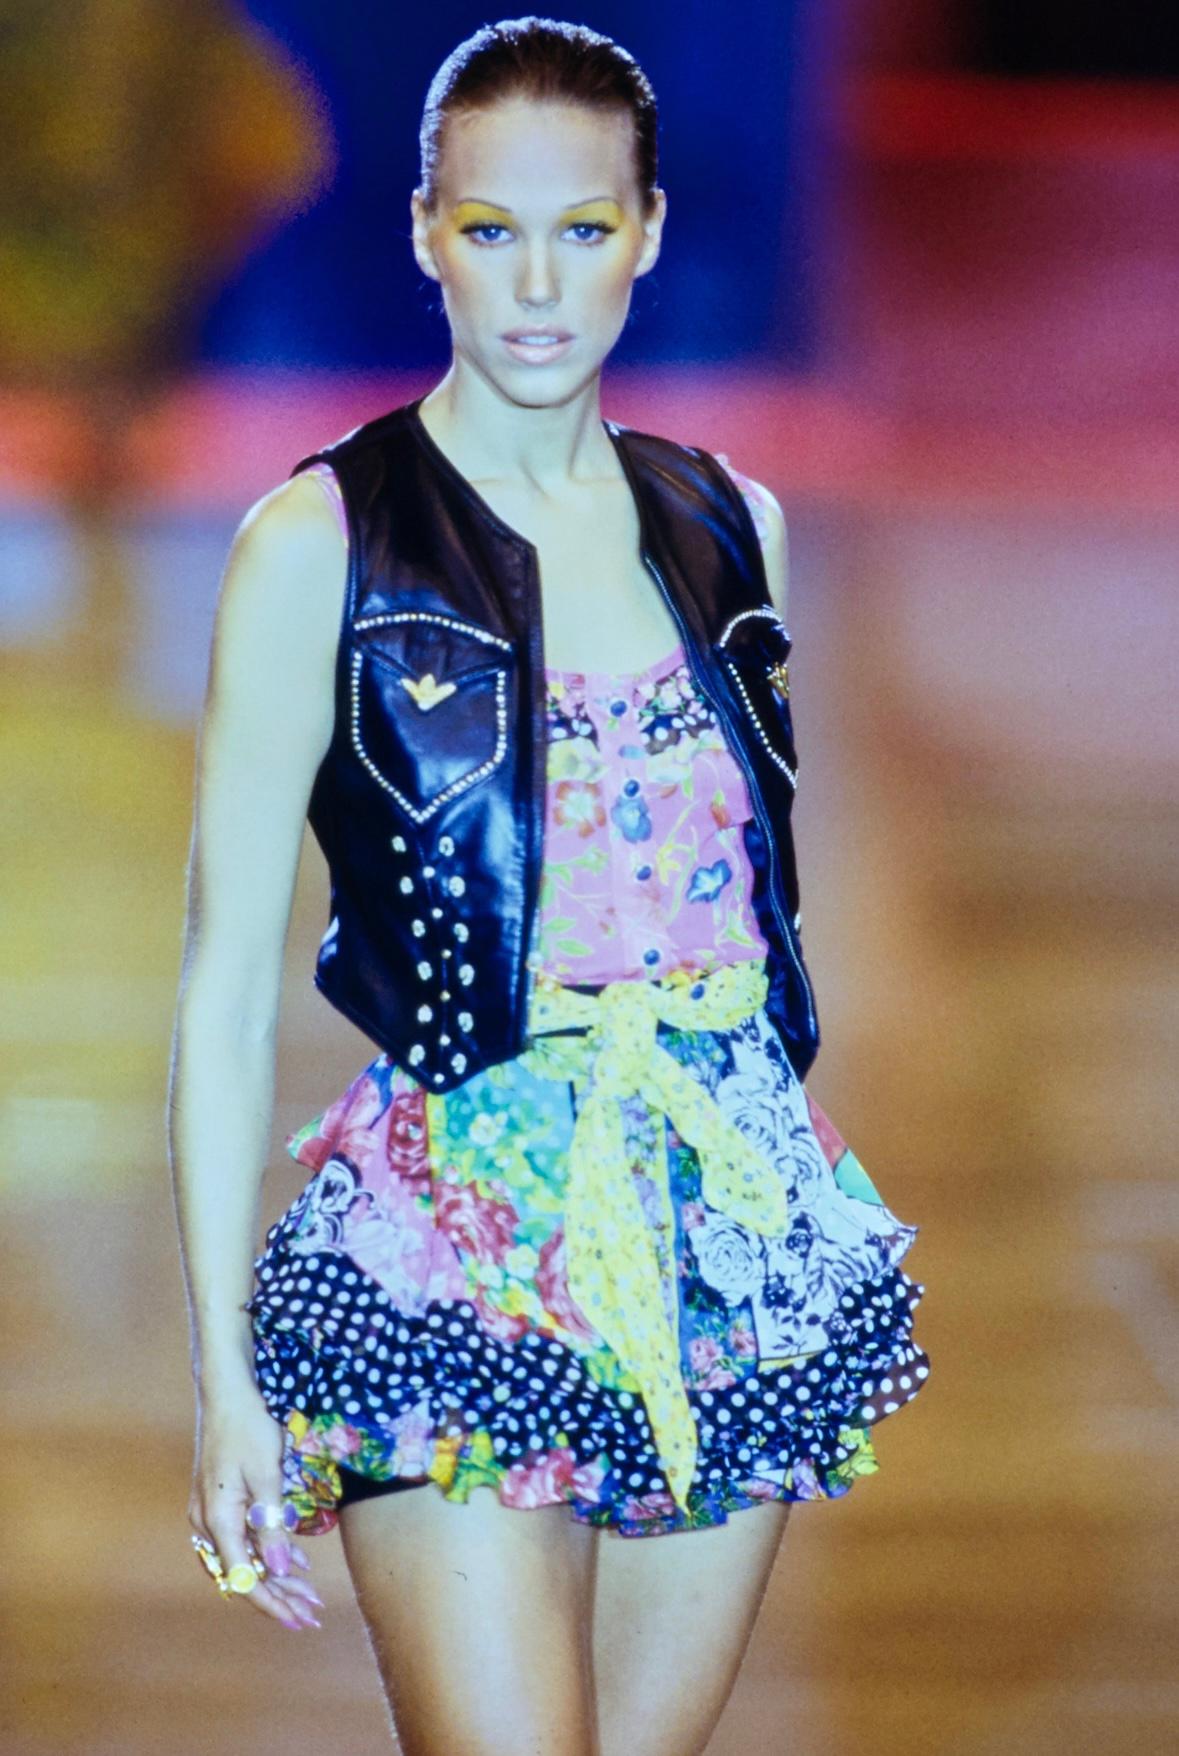 Presenting a pink floral Gianni Versace sleeveless top, designed by Gianni Versace. From the Spring/Summer 1993 collection, this top debuted on the season's runway on Emma Wiklund. This girly top features a scoop neckline accented with layers of